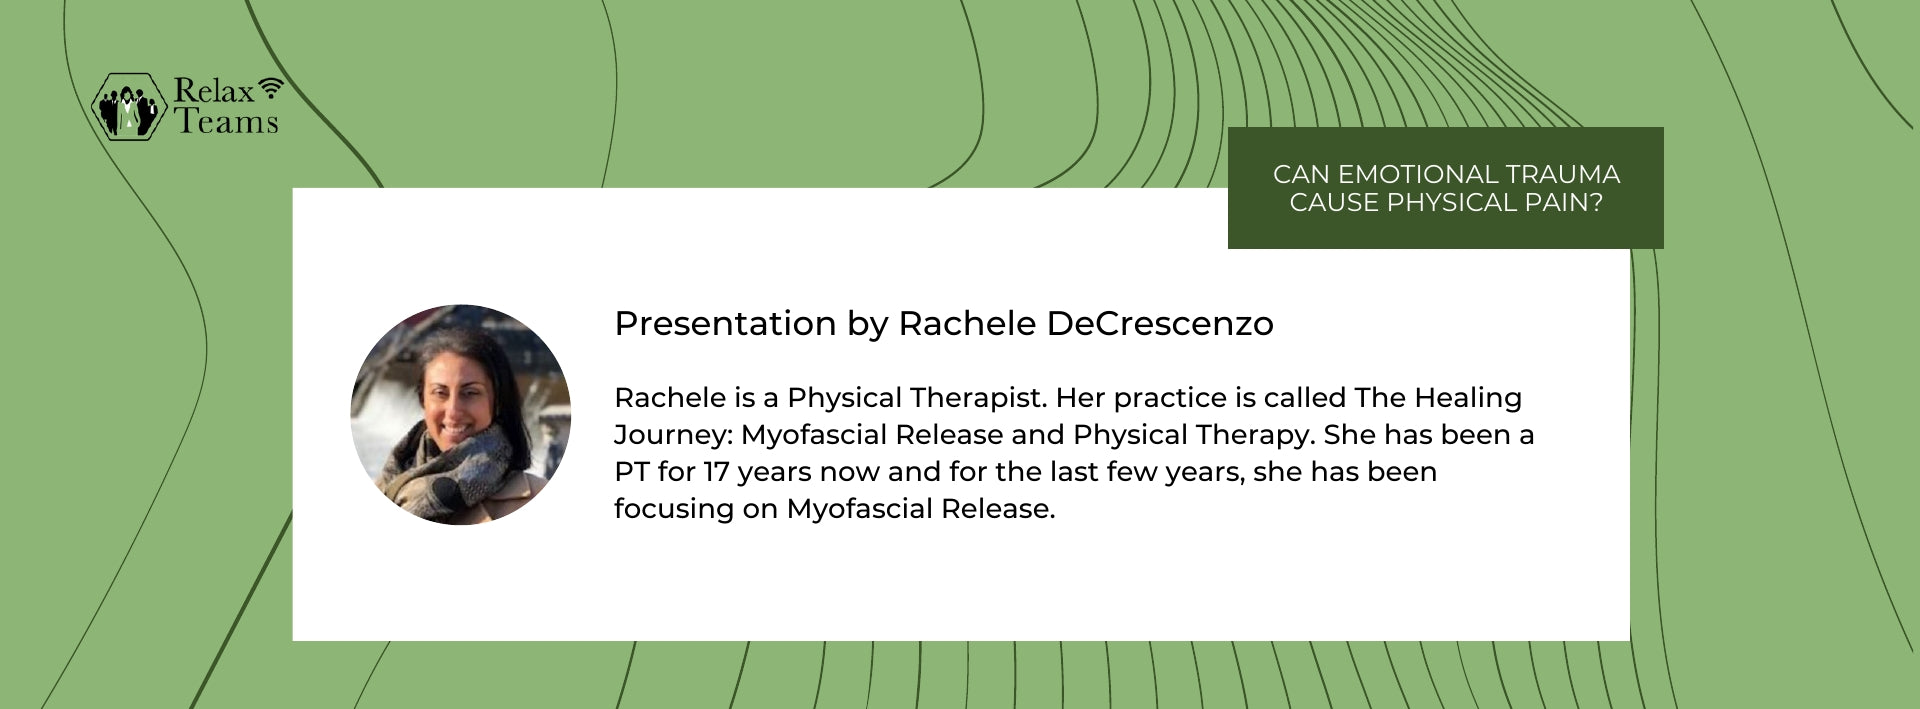 Rachele is a Physical Therapist. Her practice is called The Healing Journey: Myofascial Release and Physical Therapy. 